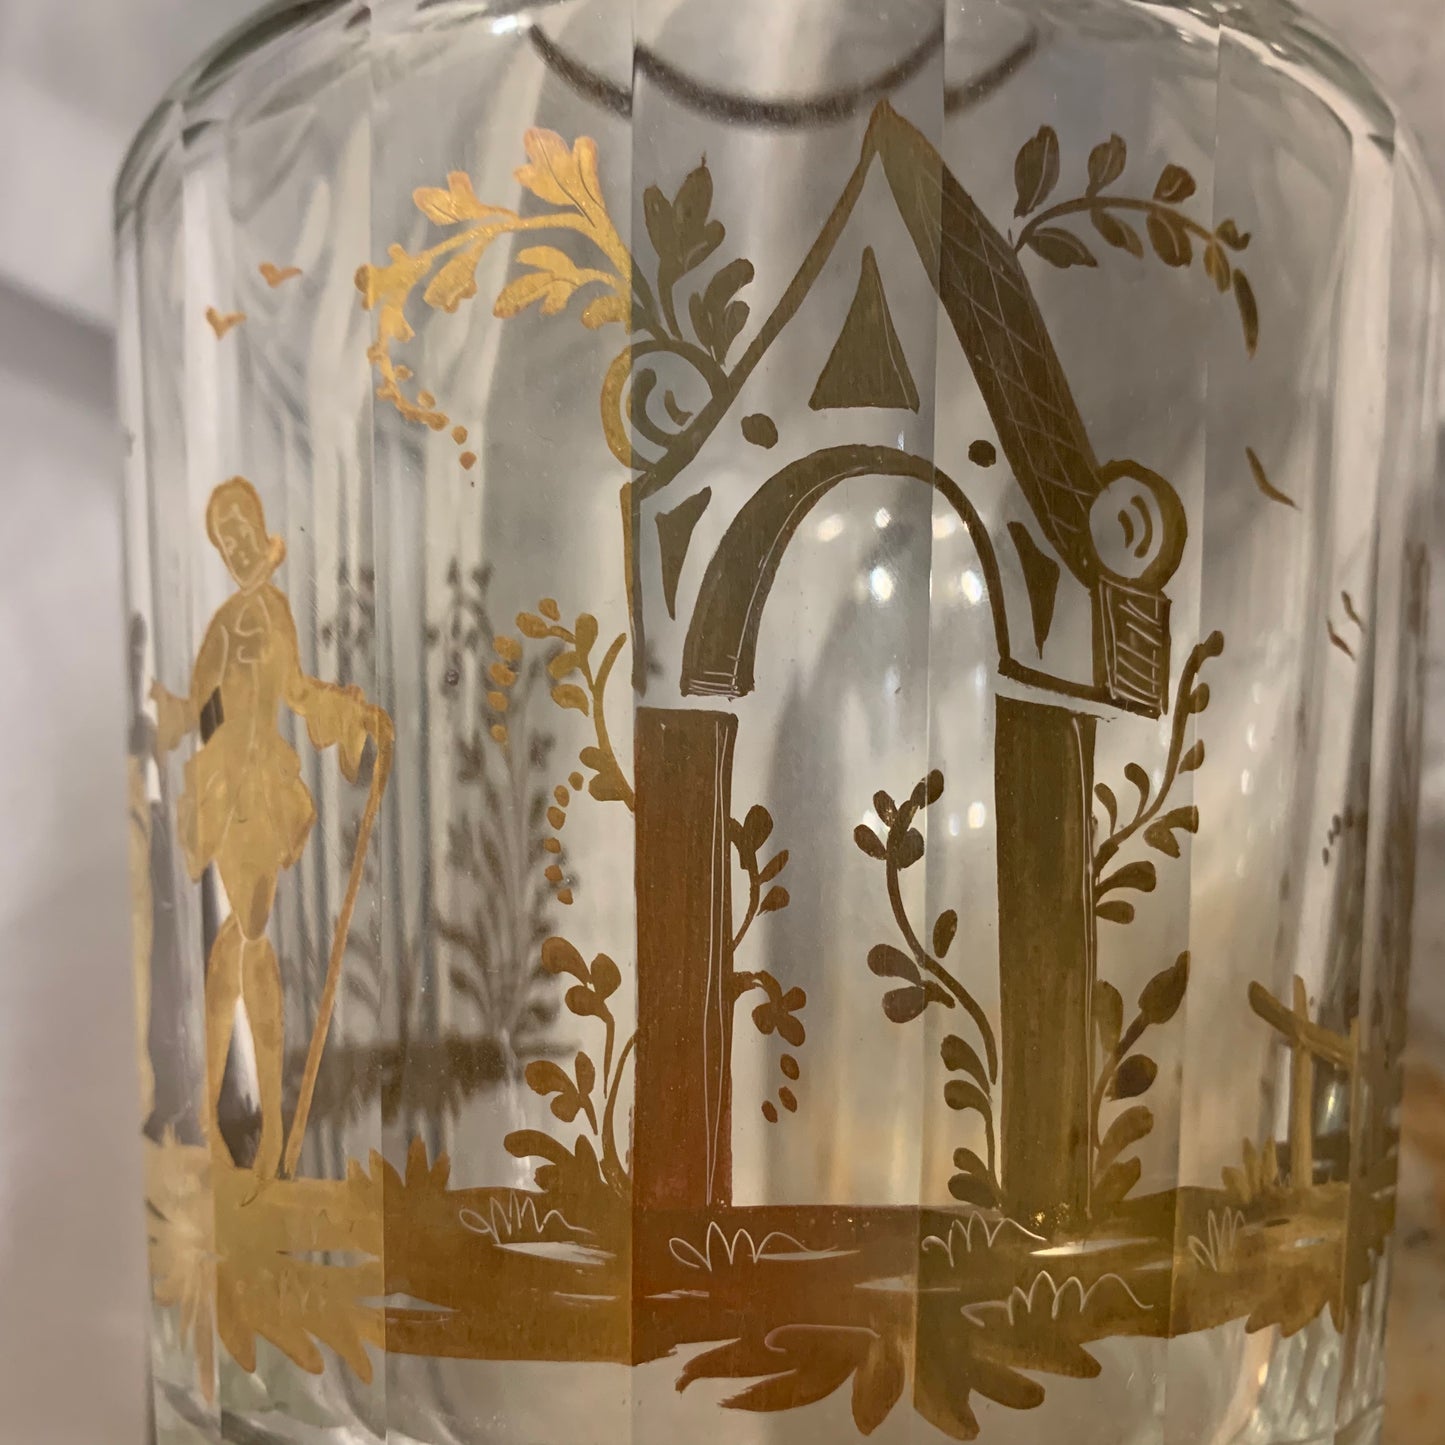 Gold-painted glass carafe with gallant scenes. Italy. Late 19th century